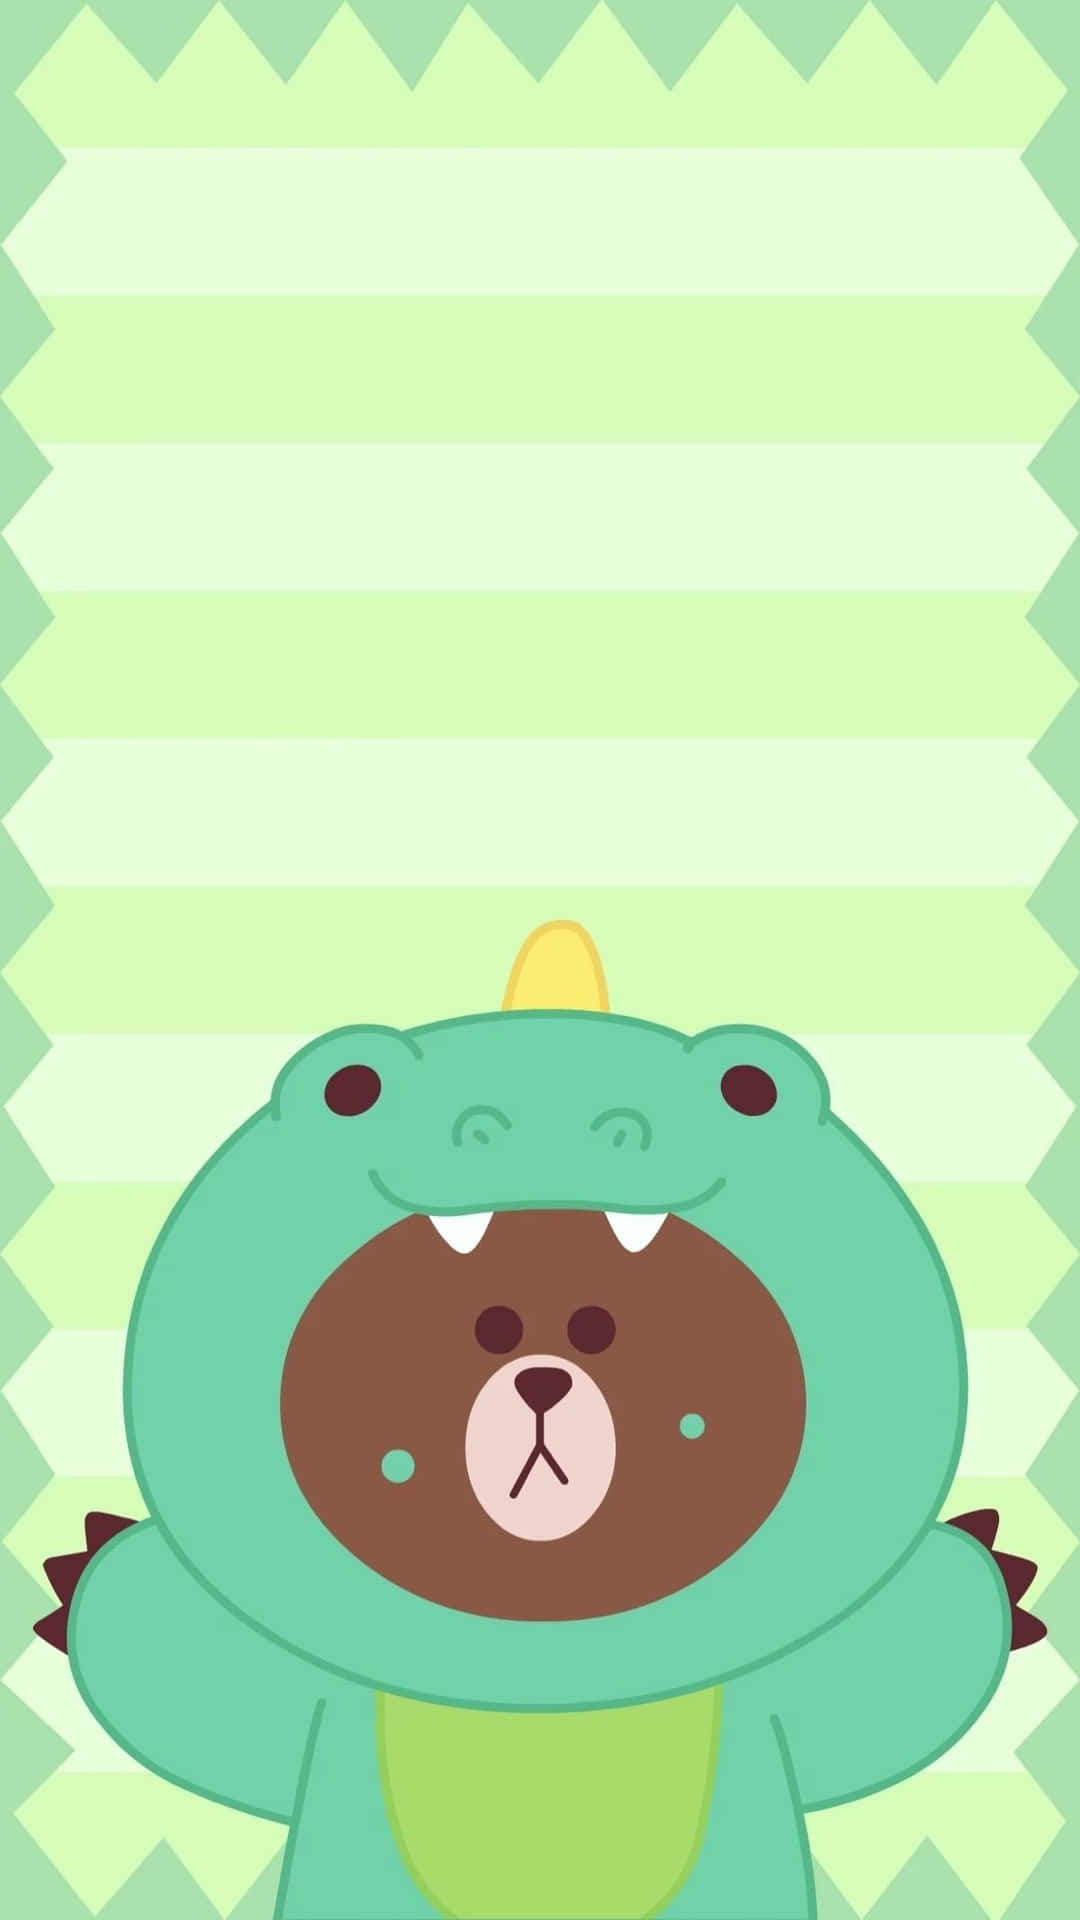 Spread some happy with this sweet Cute Green Kawaii! Wallpaper